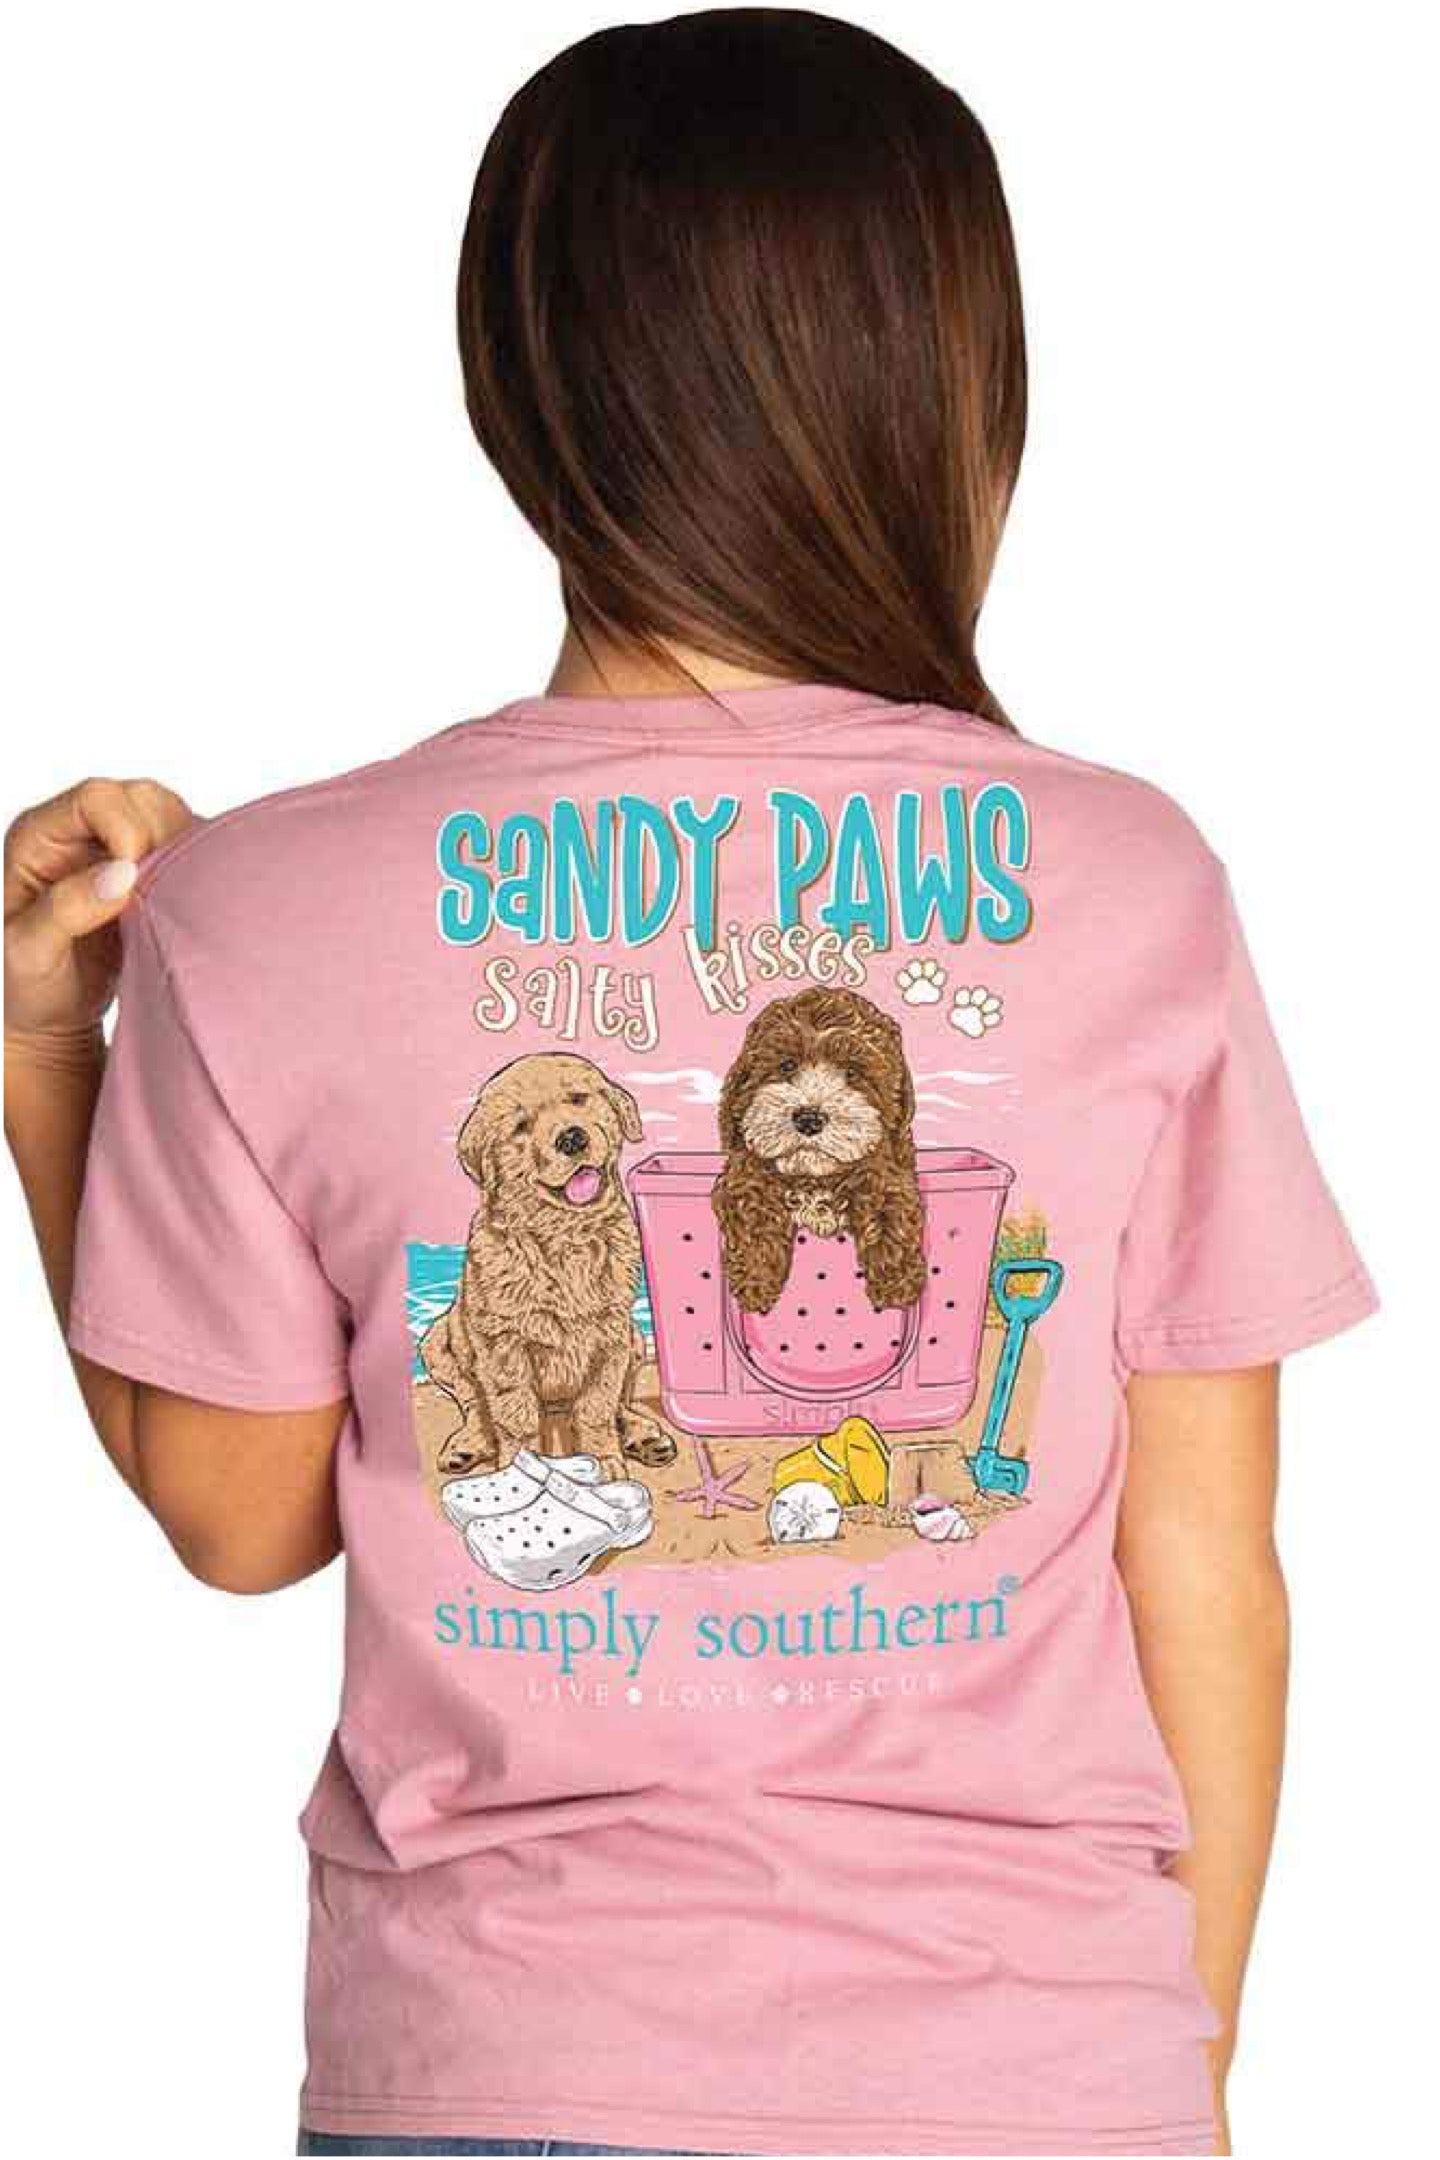 “Sandy Paws" Short Sleeve Tee by Simply Southern